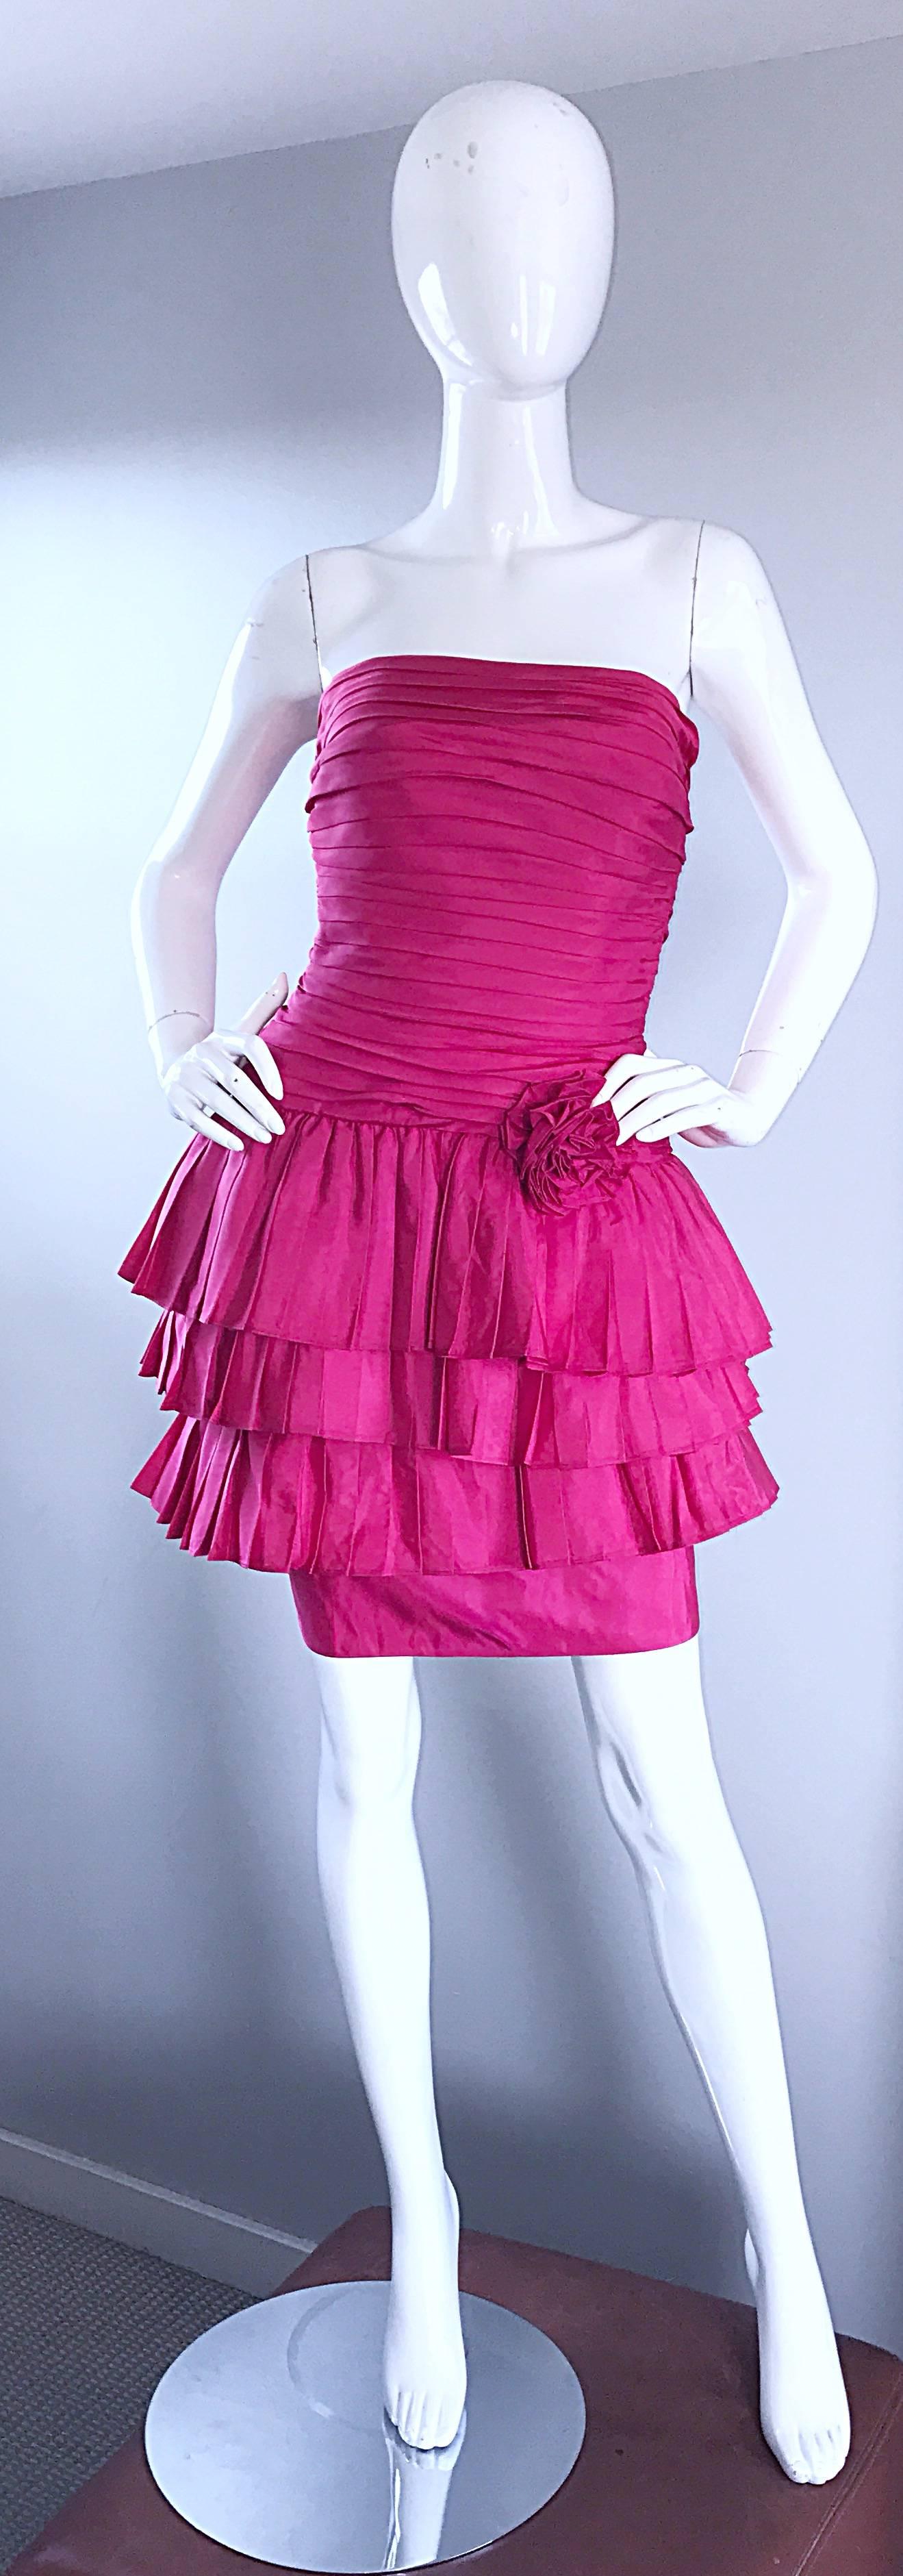 Wonderful vintage early 90s TADASHI SHOJI shocking hot pink fuchsia strapless cocktail dress! Features panels of silk on the bodice, with a tiered ruffle skirt. Corsage detail at left center waist. Hidden zipper up the side with hook-and-eye